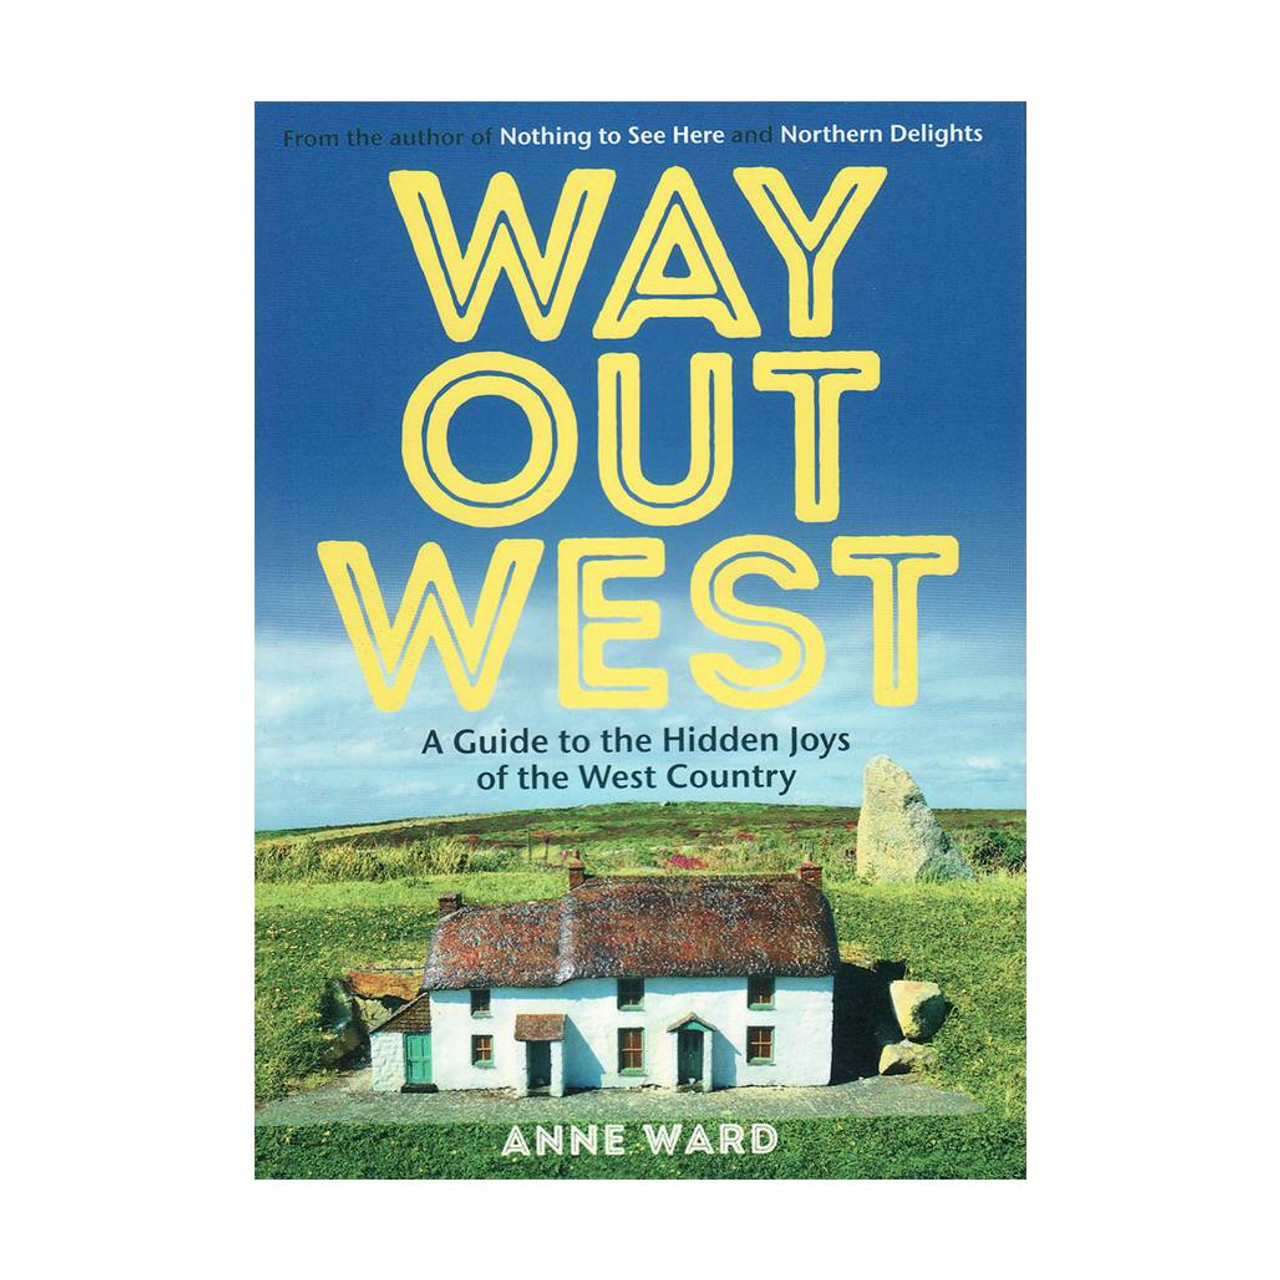 Way Out West: A Guide To The Hidden Joys Of The West Country